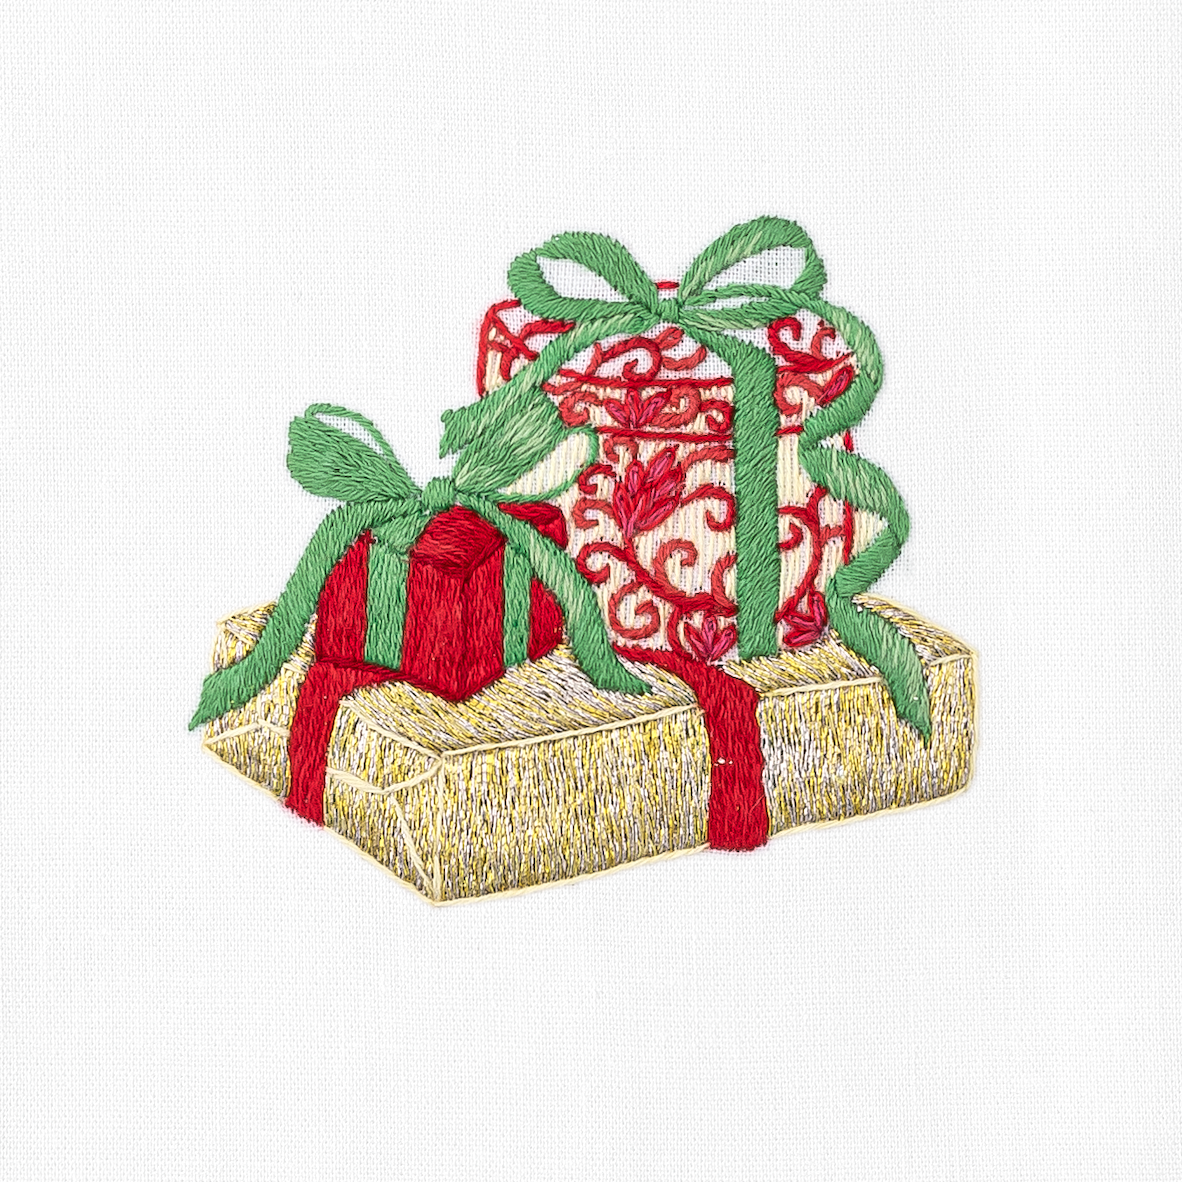 A detailed image of the embroidery -  A stacked trio of glittering christmas gifts in gold, red, and green thread